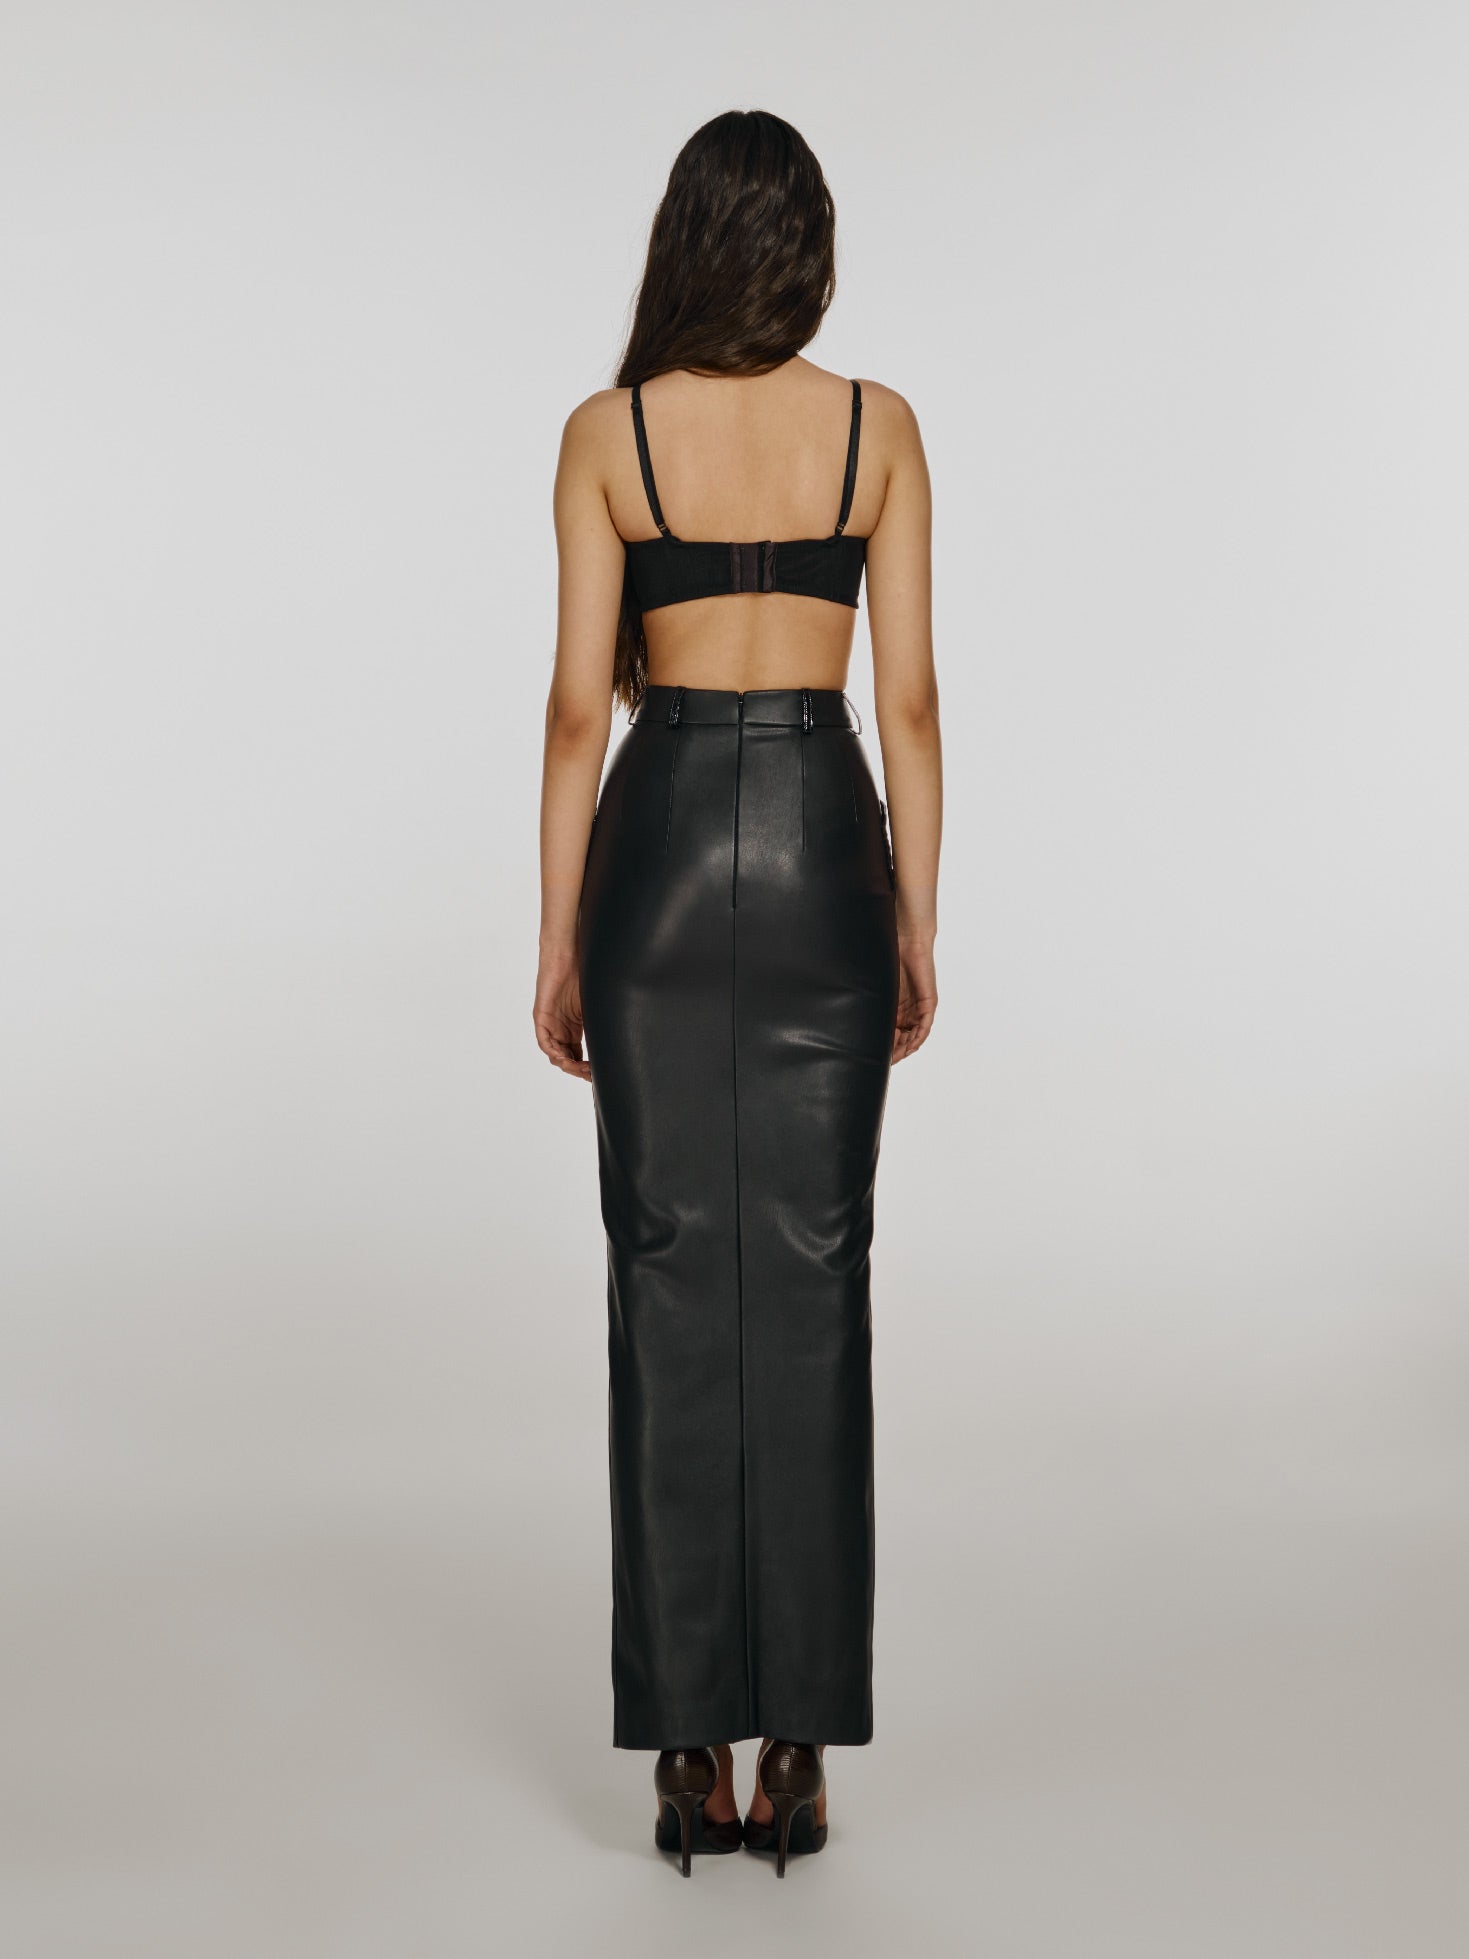 Full shot of a girl facing back in a black mesh crop top with horizontal cut and a black vegan leather skirt with high front slit